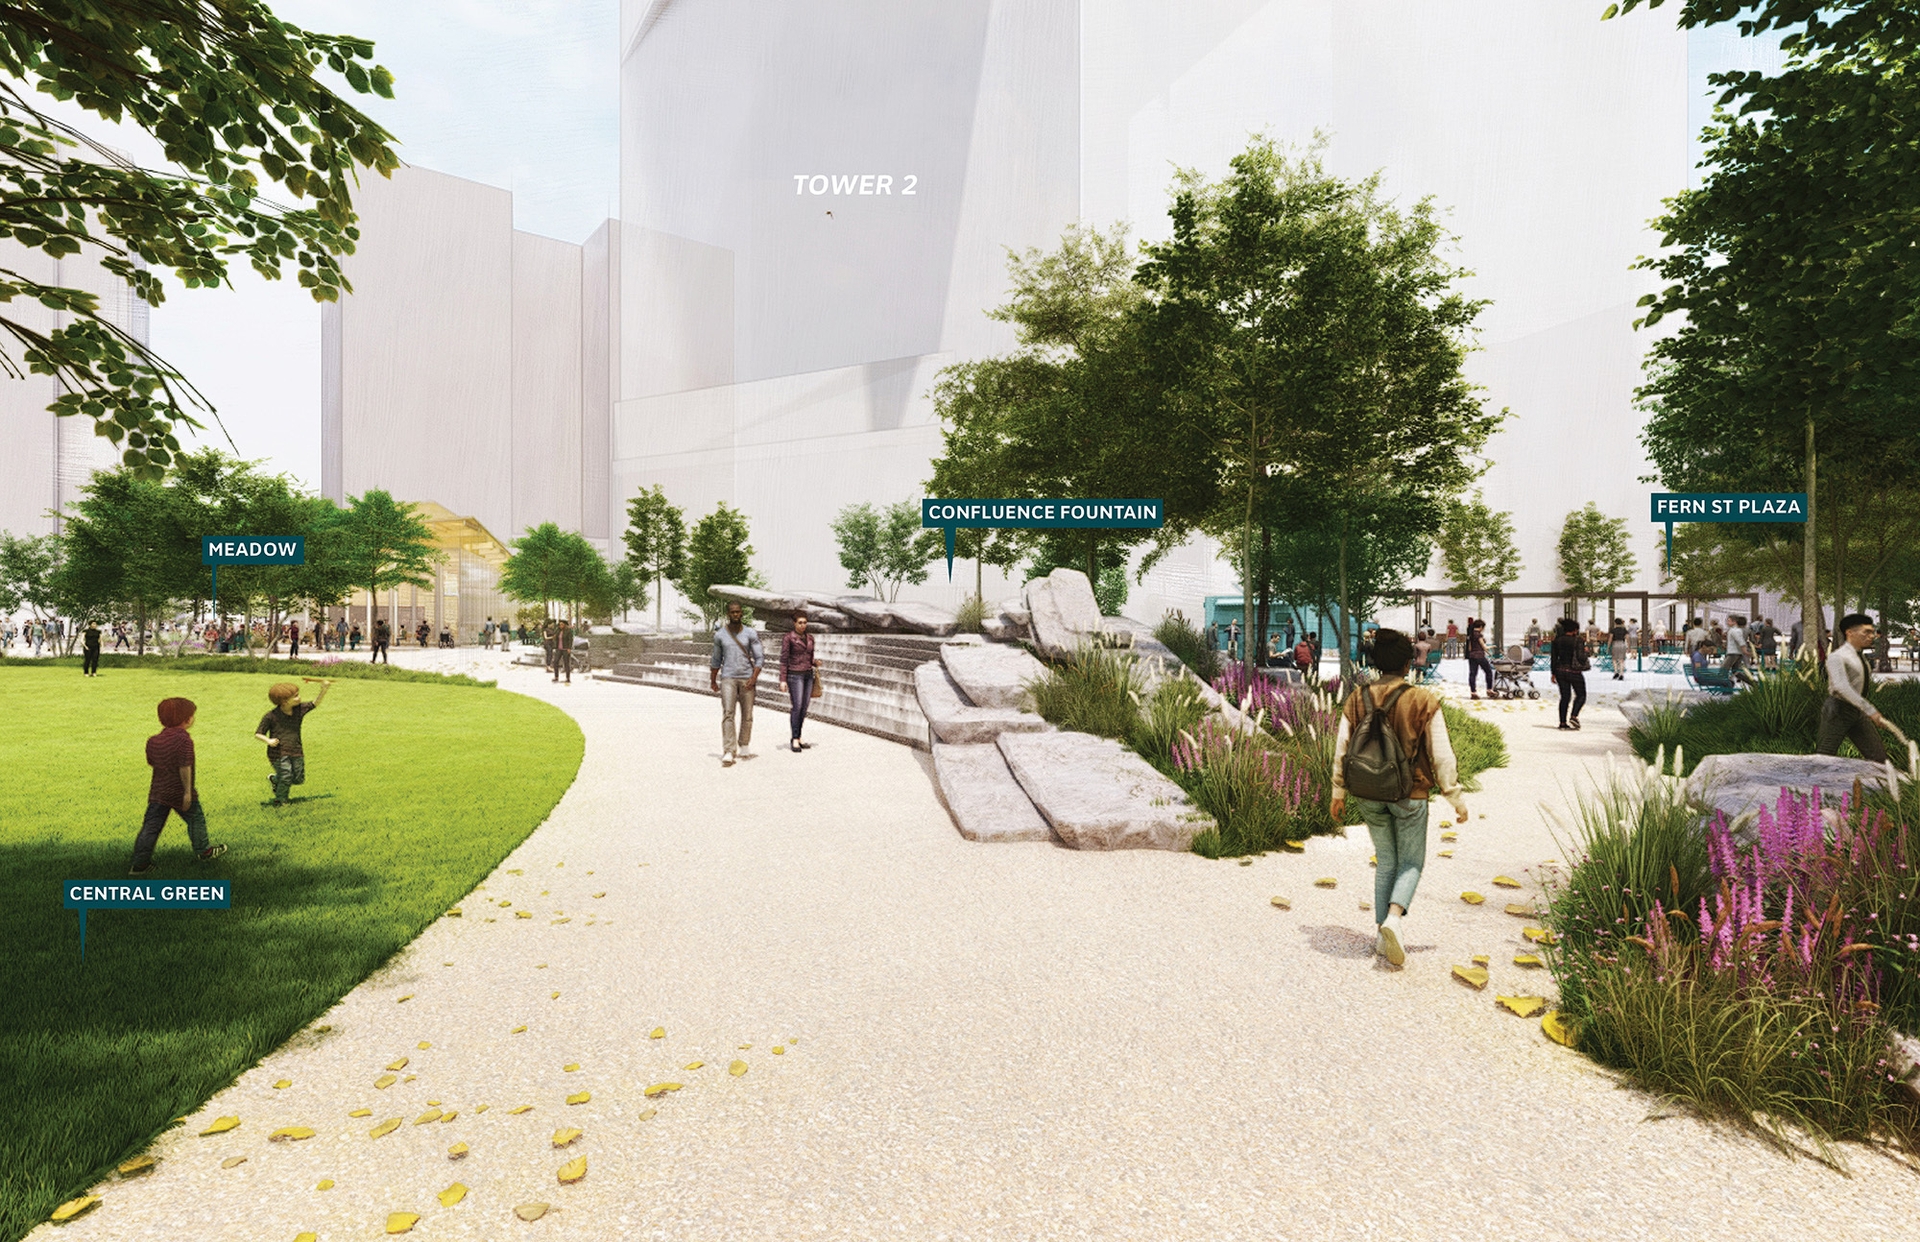 A rendering of the exterior of Amazon's HQ2. There is a large, paved walkway surrounded by green grass and trees with large buildings in the distance.